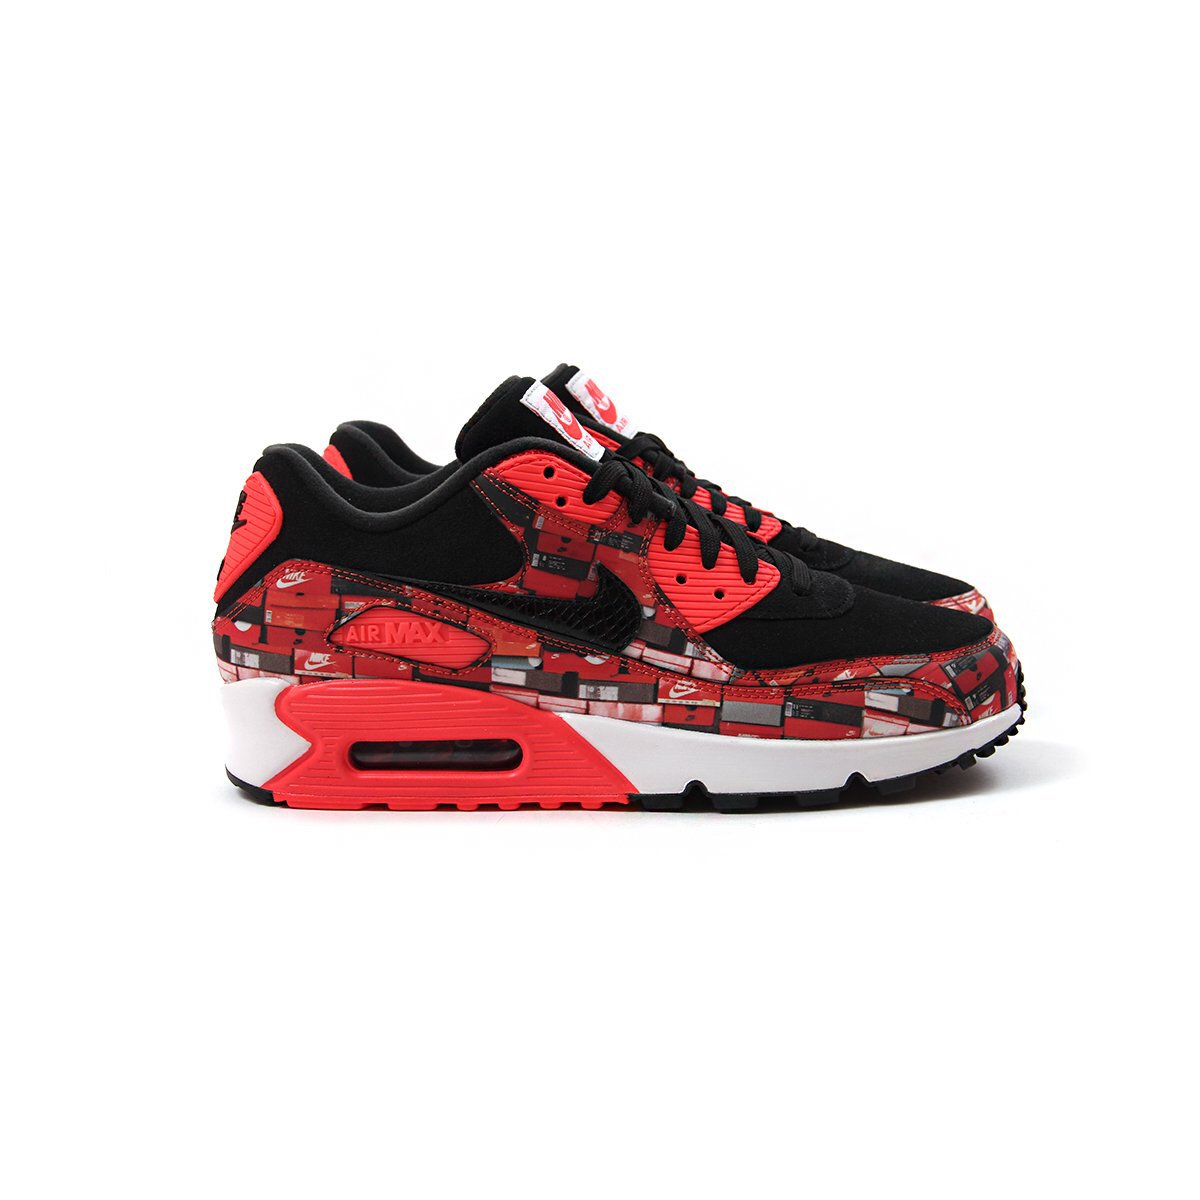 Concepts on "Atmos x Nike “We Love Nike” Air Max 90 is now available in Cambridge, New York &amp; https://t.co/LhbyR5GNrS #cncpts #nike #airmax90 / Twitter